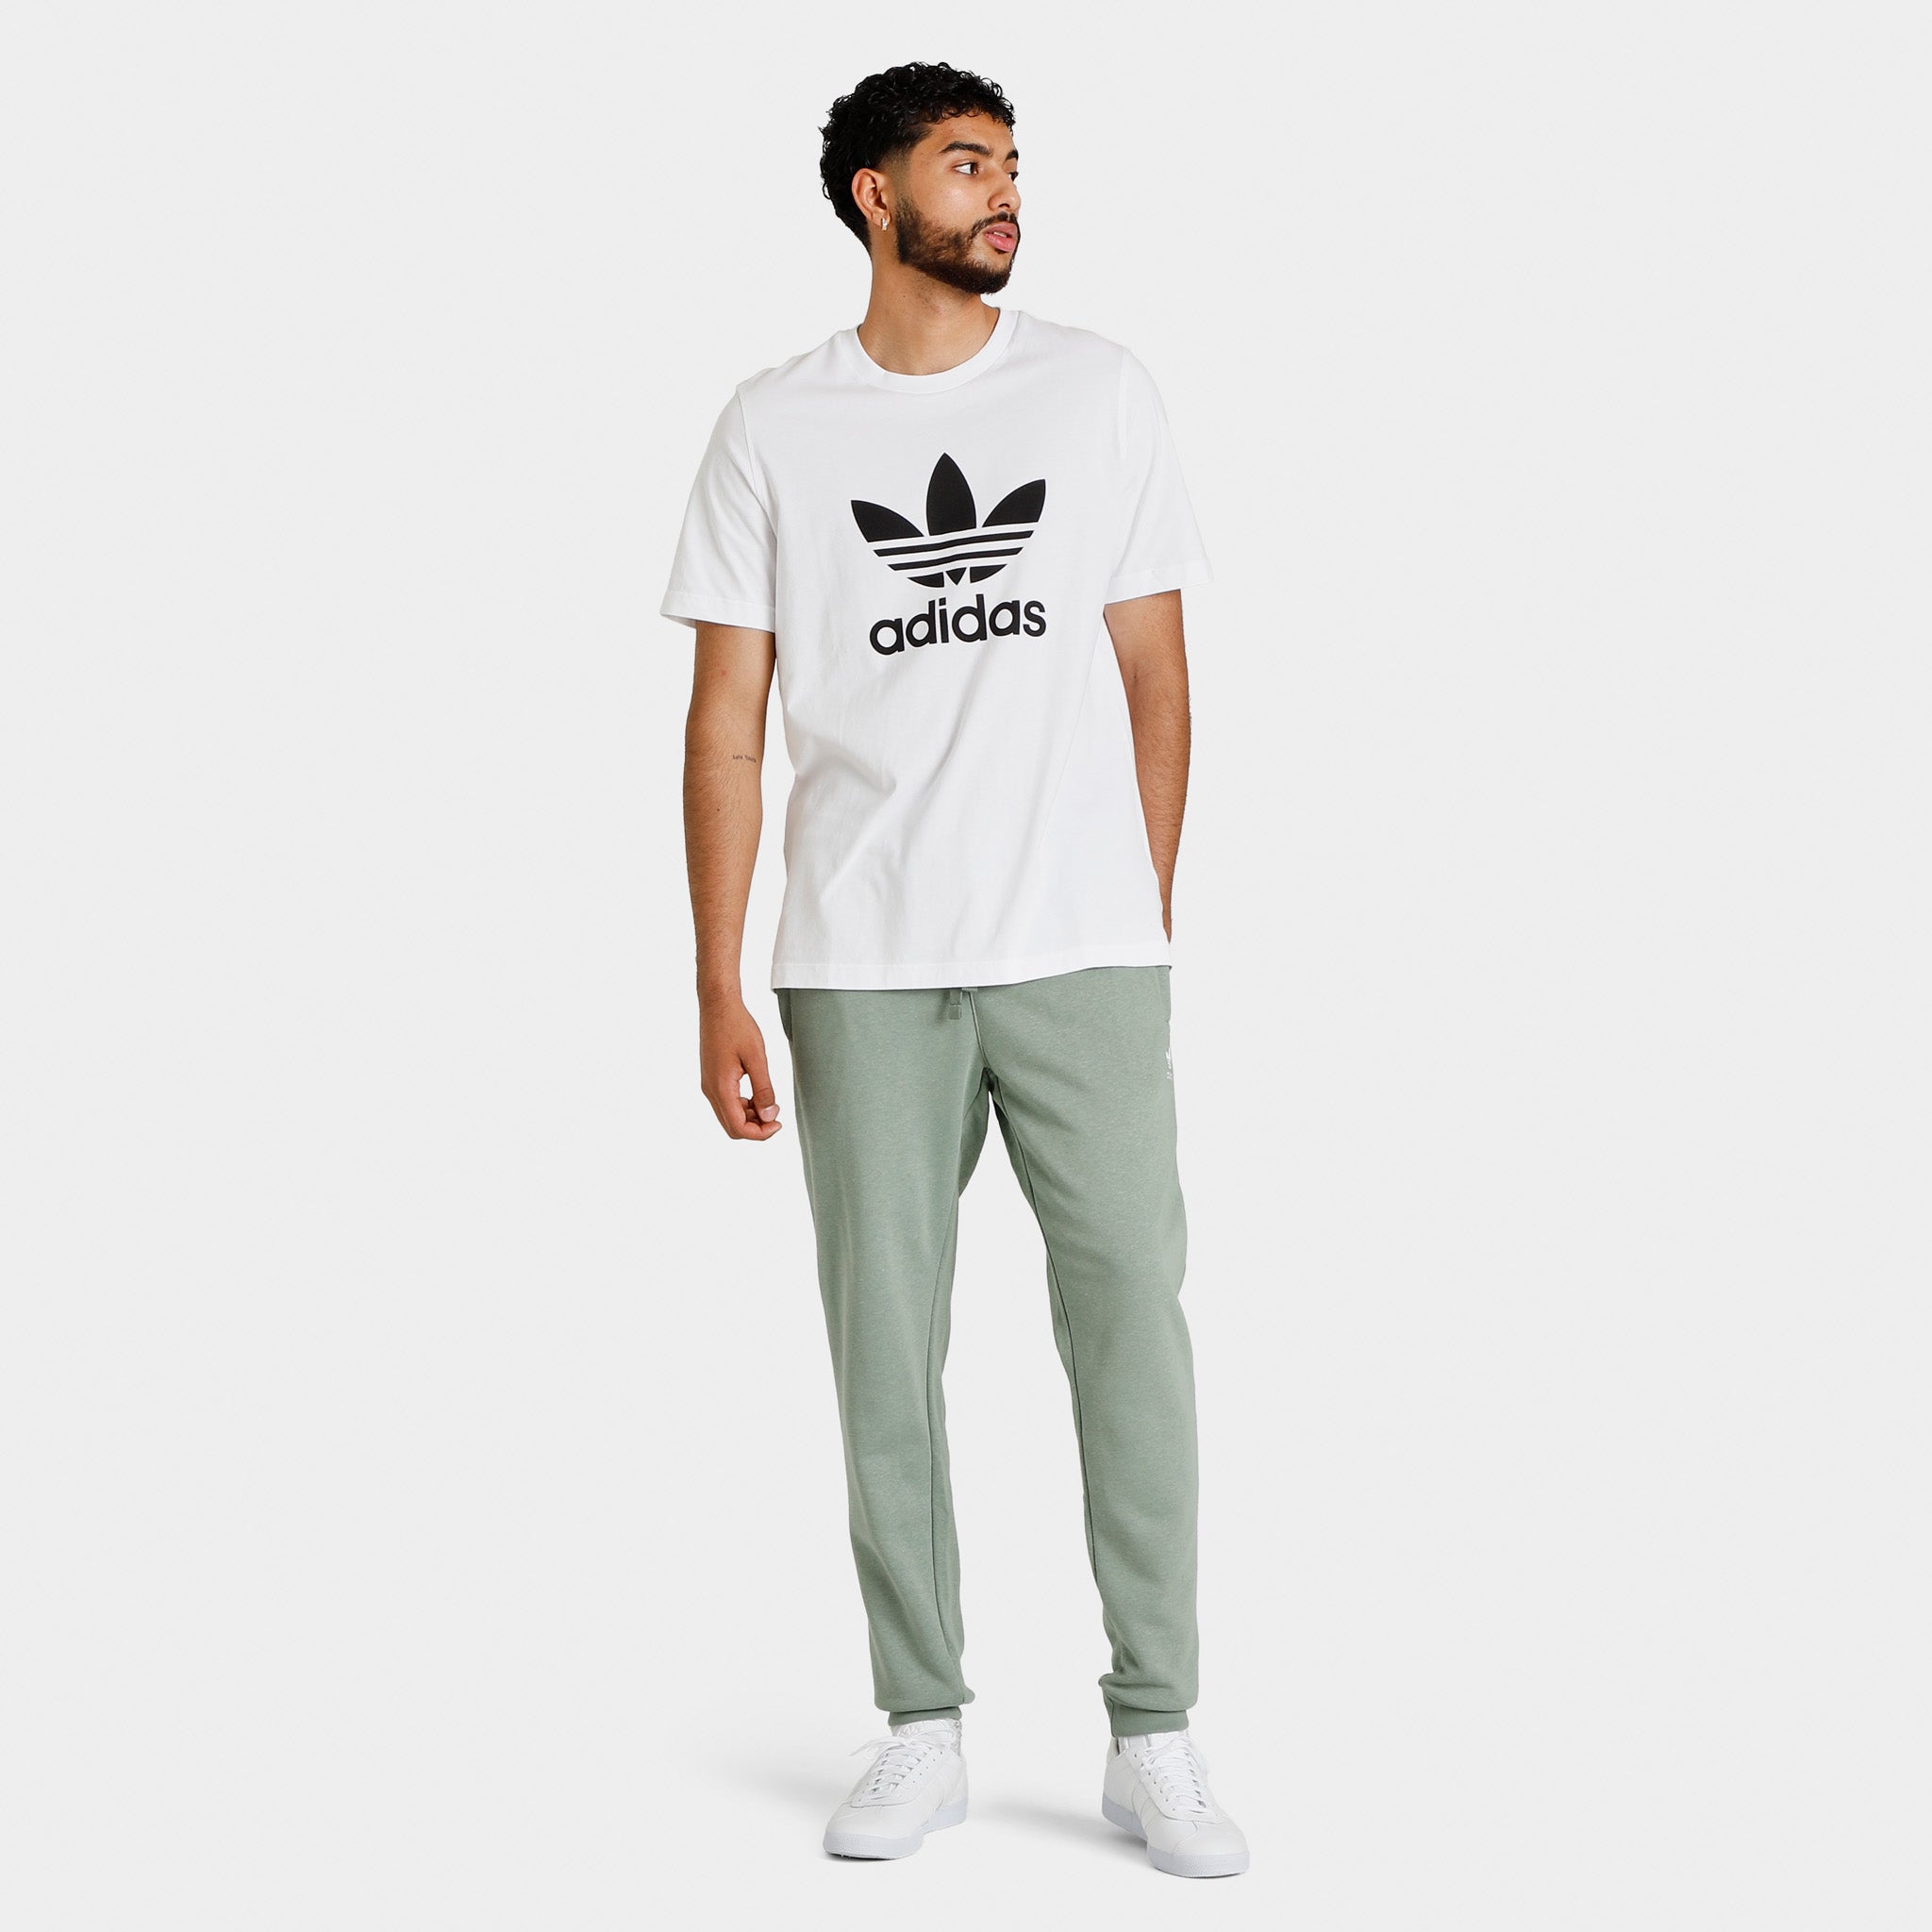 Only 42.00 usd the at Green Silver Hemp Online Made Pants Shop with adidas / for Originals Essentials